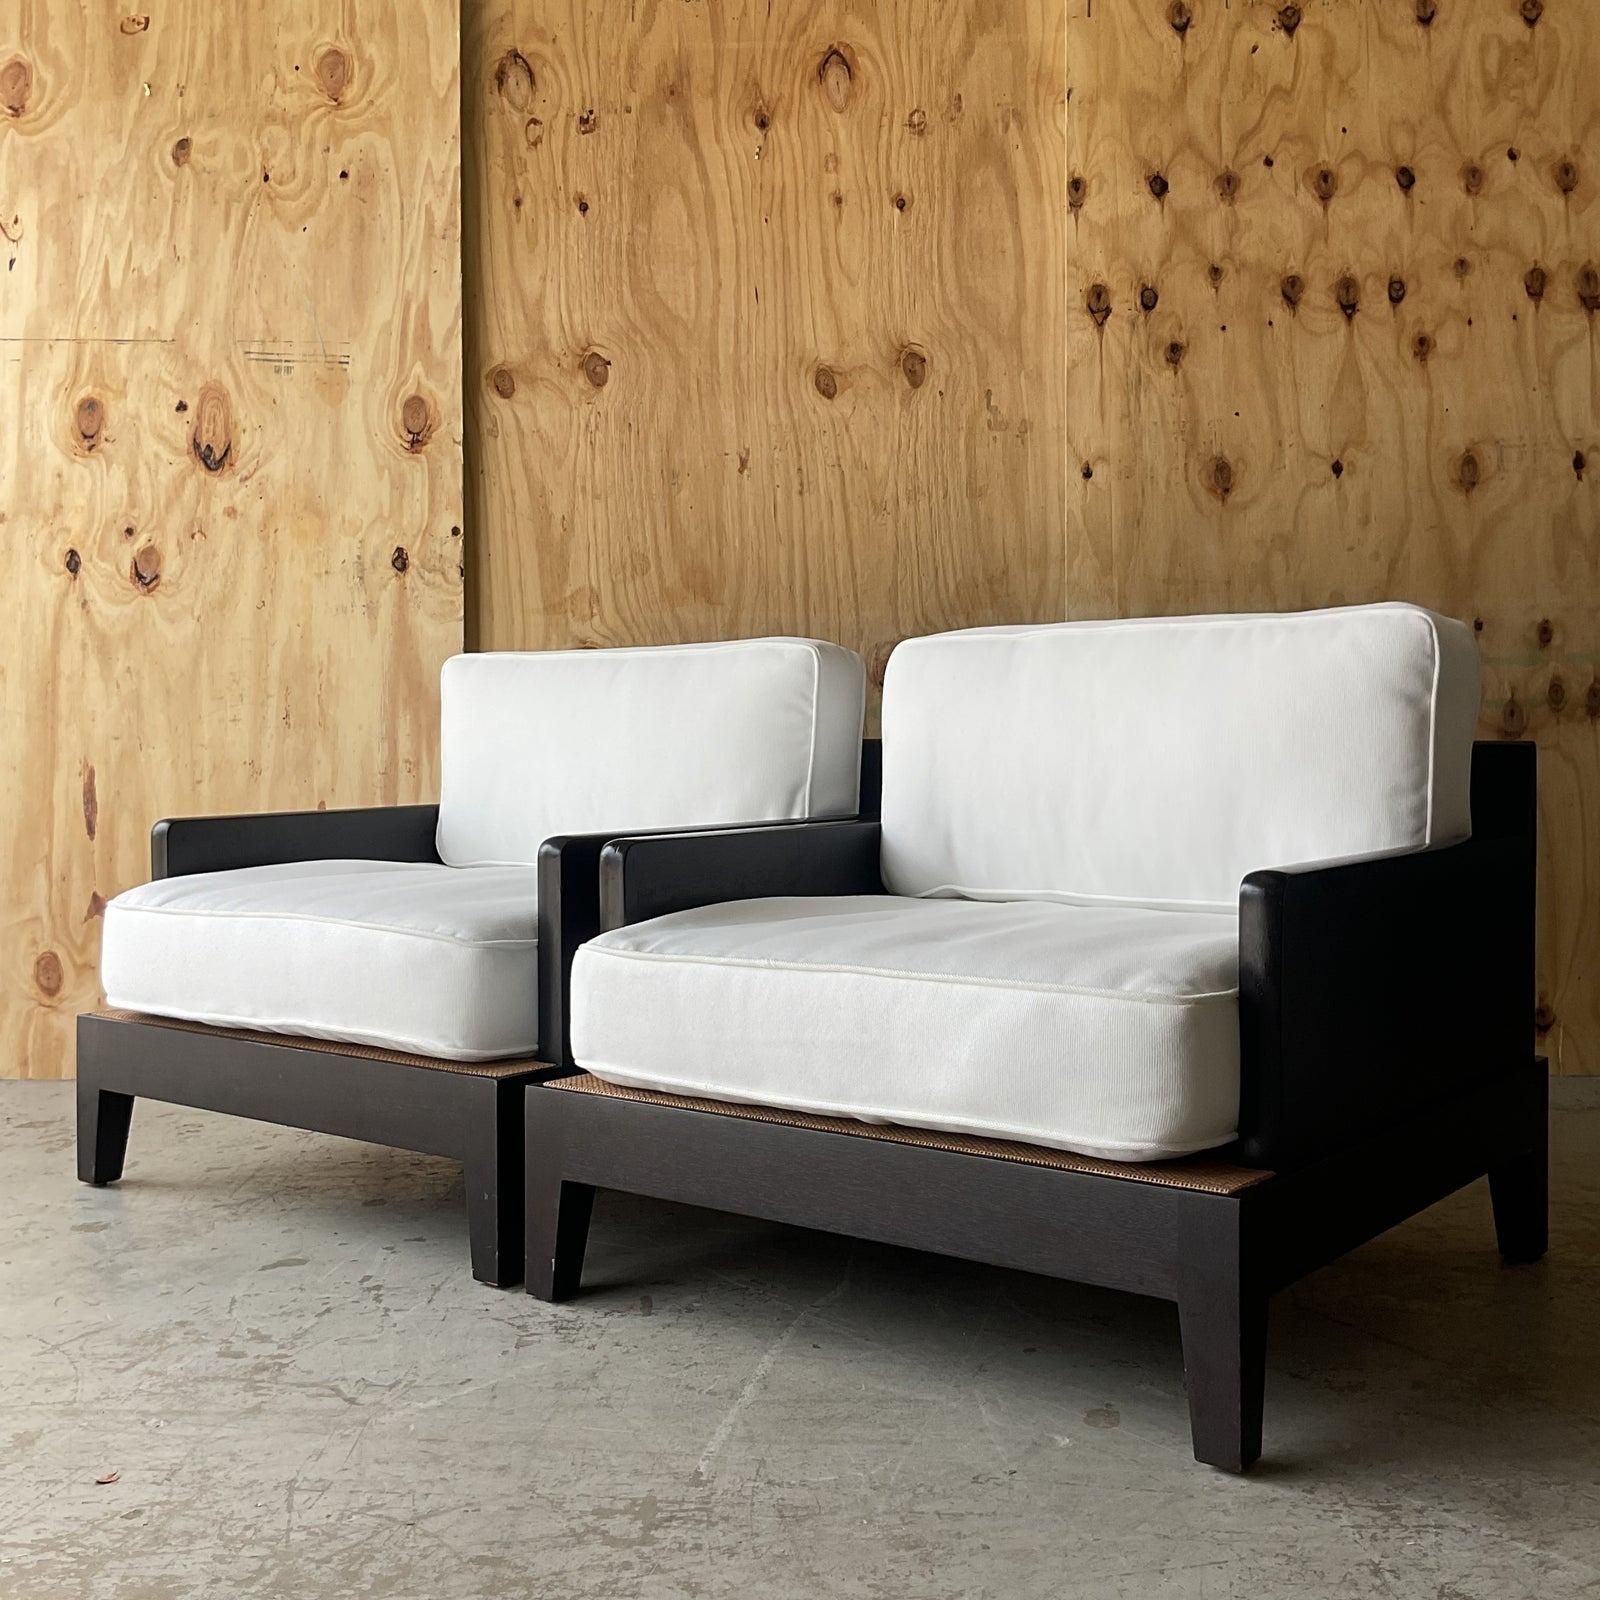 An exceptional pair of vintage Boho lounge chairs. Designed by Christian Liaigre for Holly Hunt. The coveted “Opium” style. A chic ebony wood frame with loose upholstered cushions. Tagged under the seats. Acquired from a Palm Beach estate. 